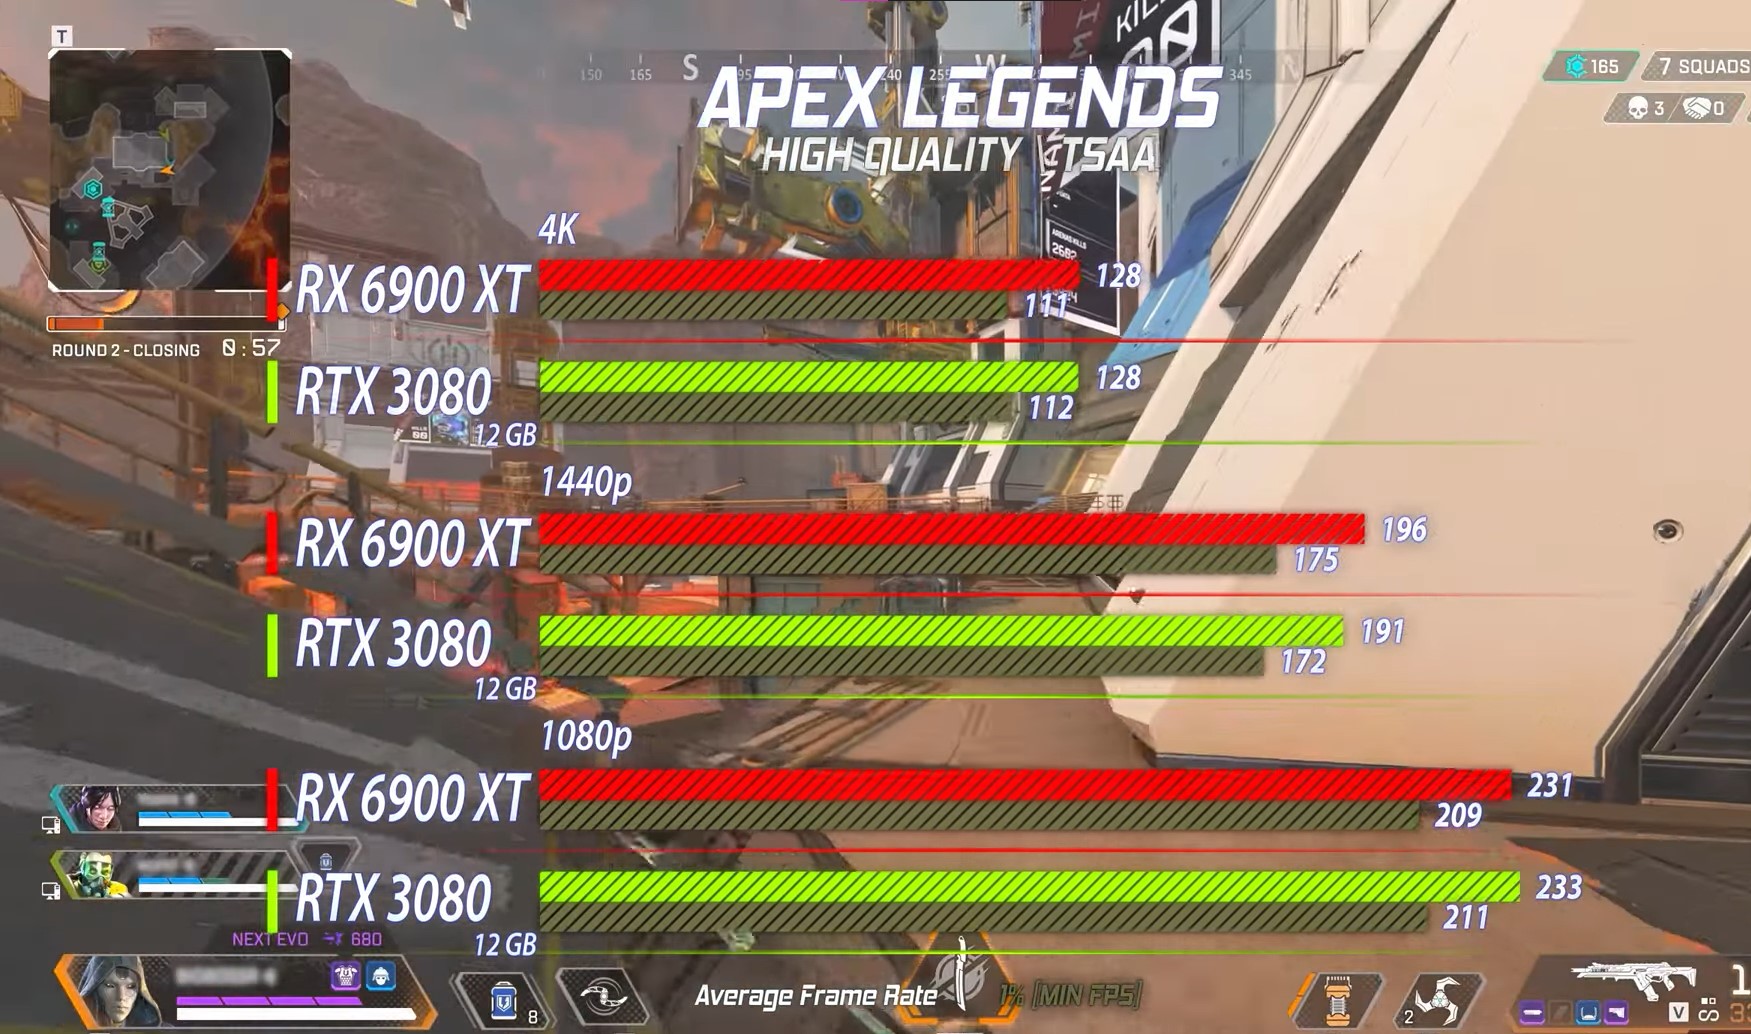 Apex Legends Benchmarks on 1080p, 1440p, and 4K